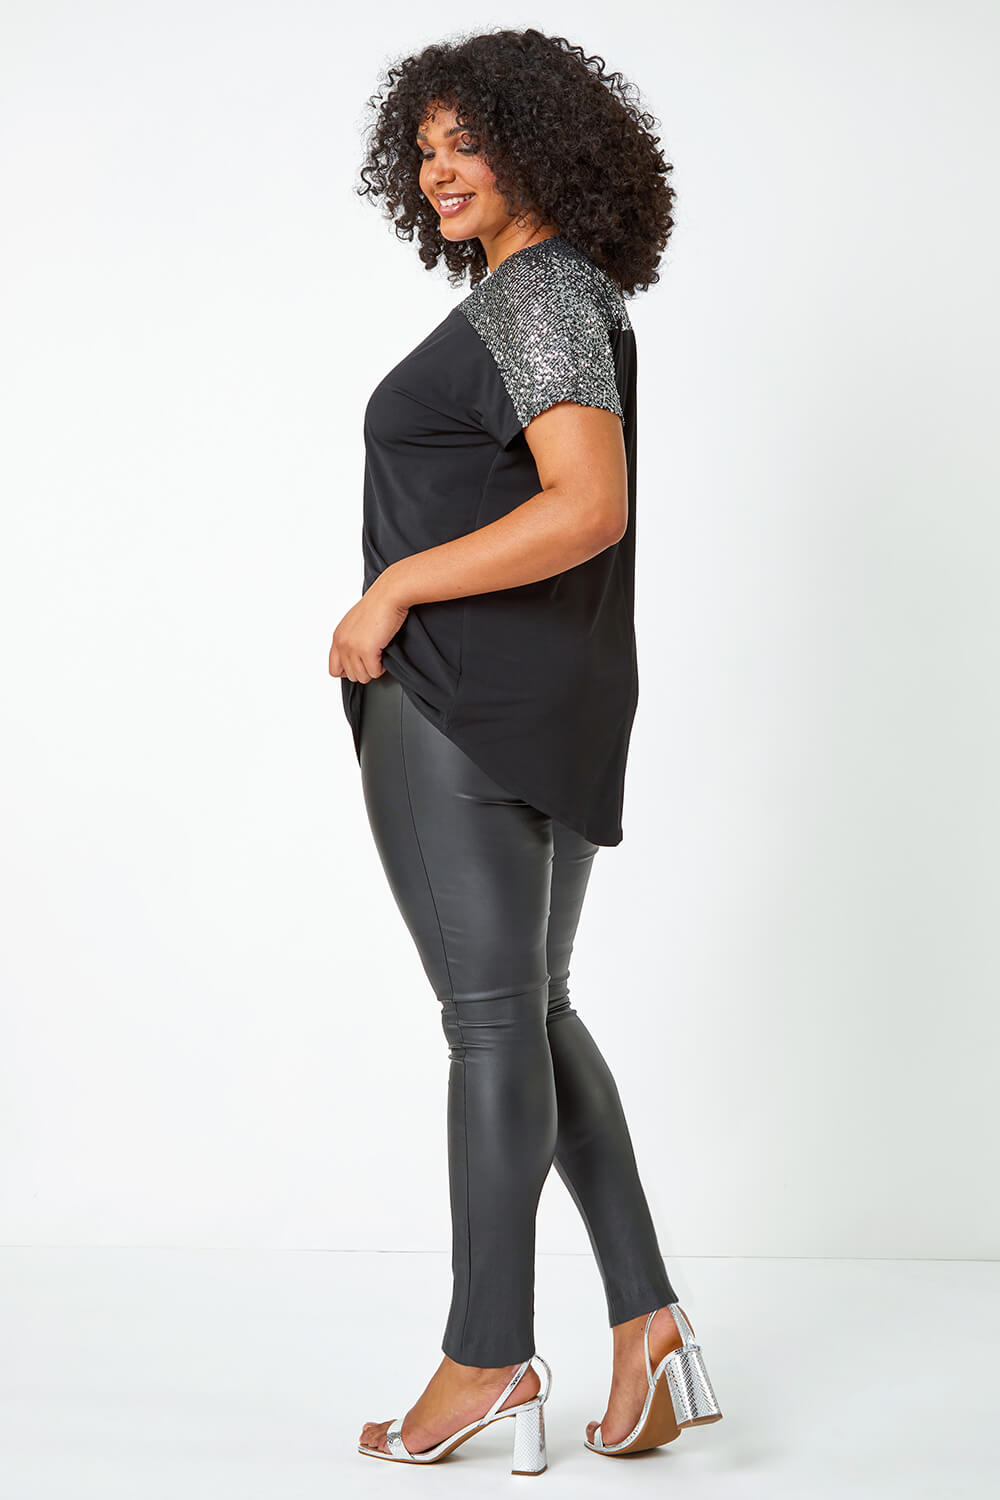 Silver Curve Sequin Embellished Stretch Top, Image 3 of 5